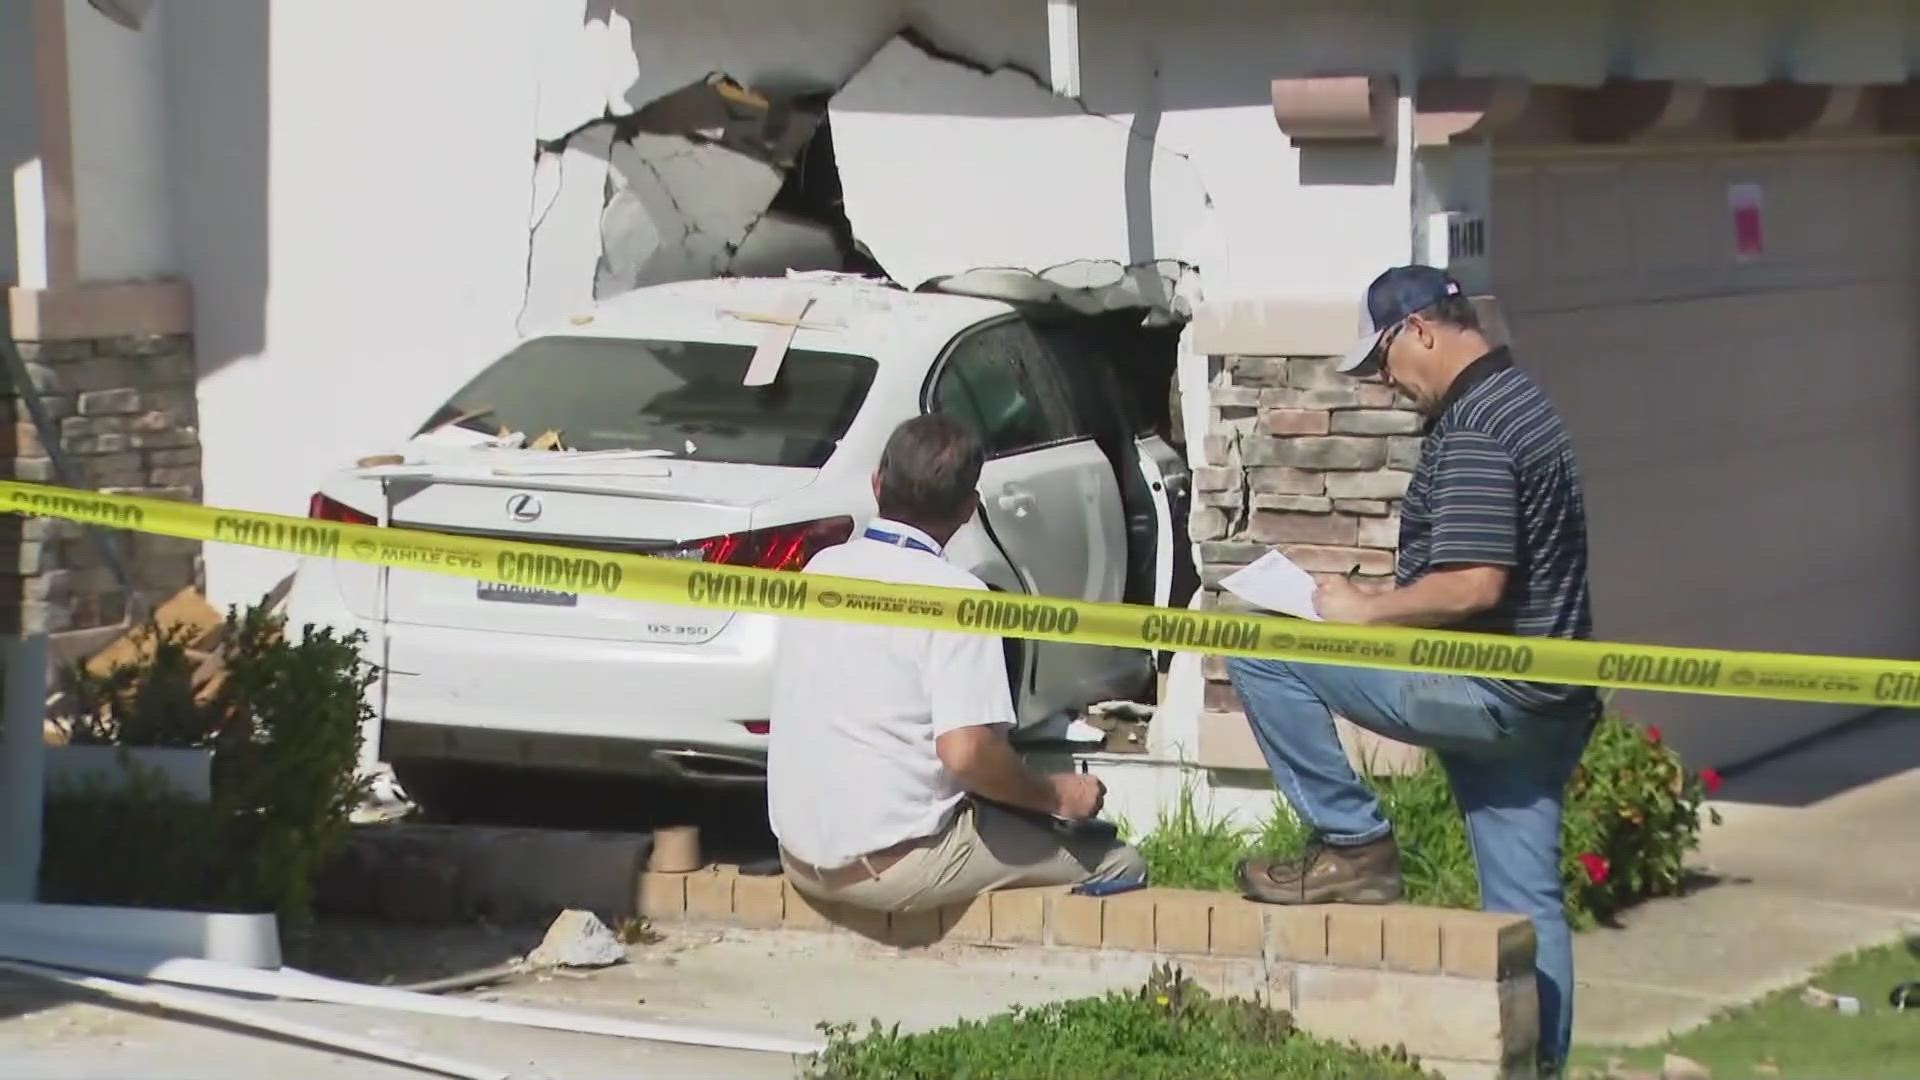 No one was injured after a driver launched her car over a home's driveway and into the side of a garage, according to police.